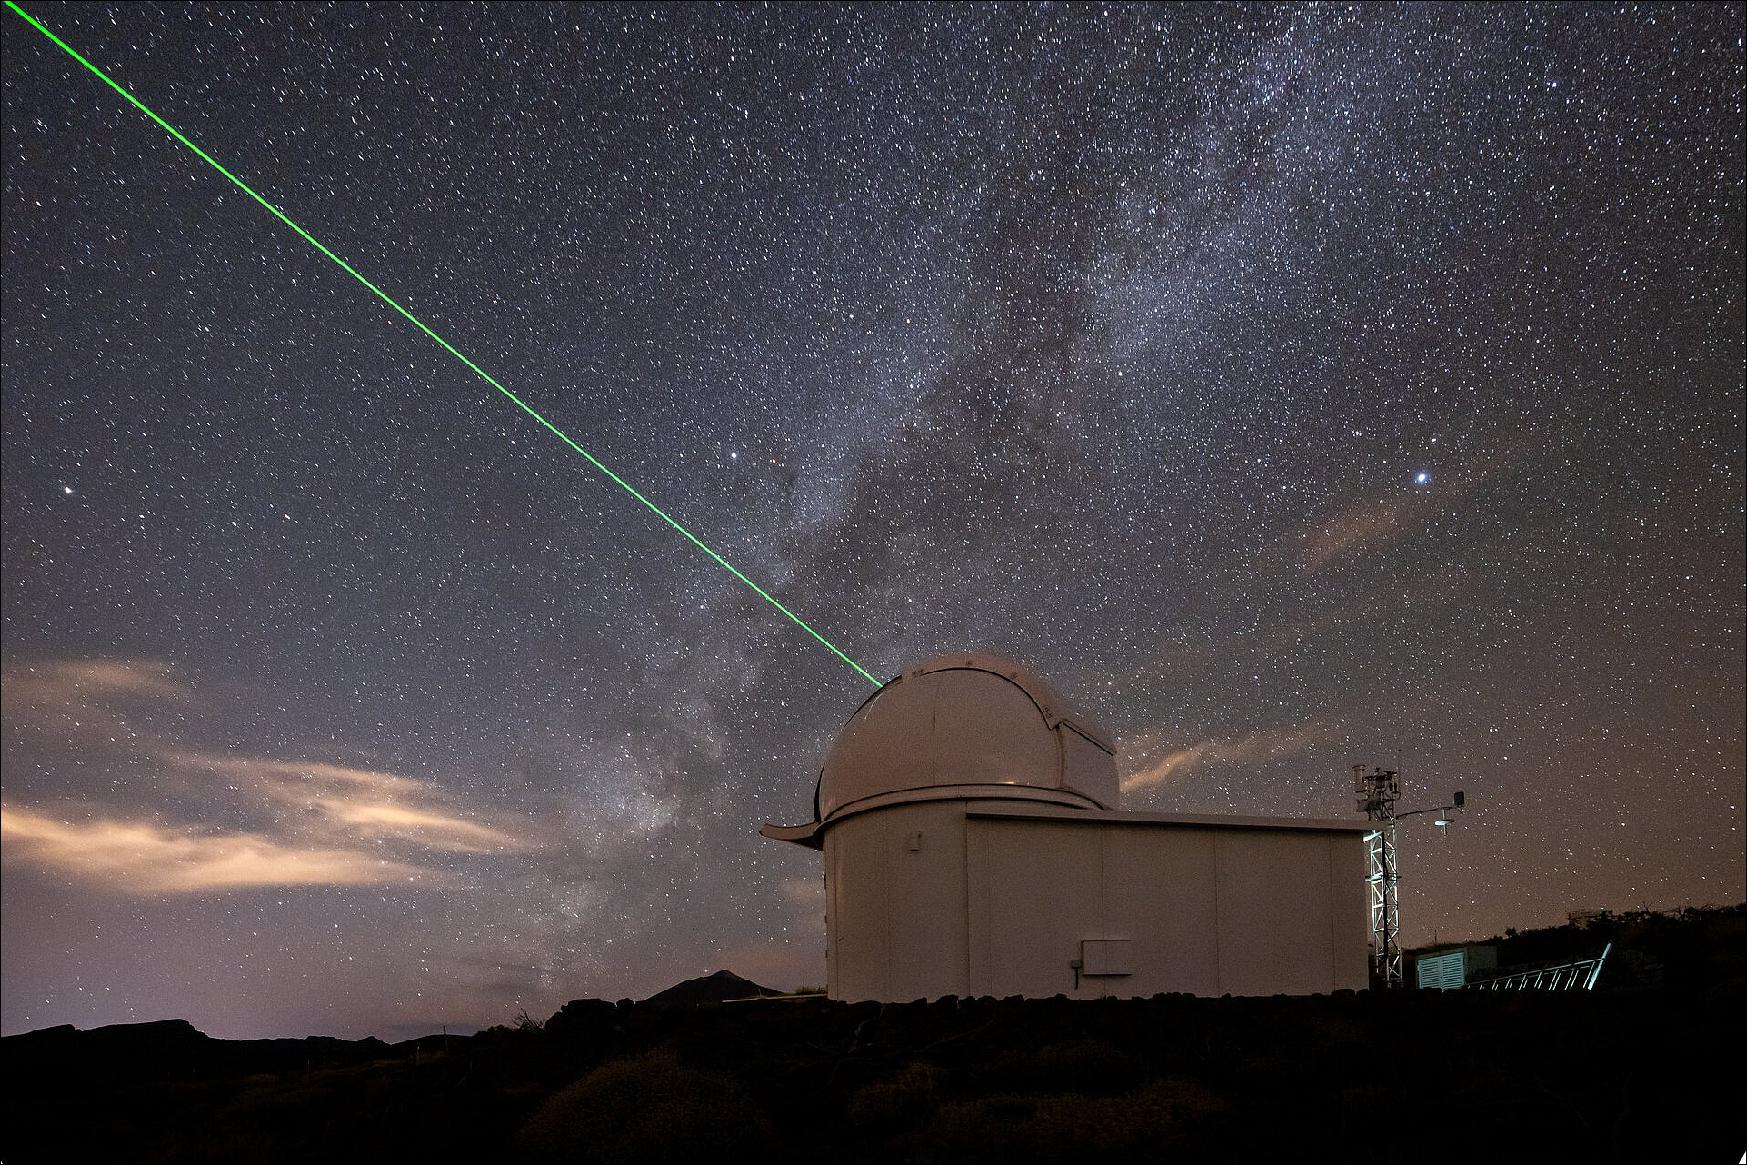 Figure 36: ESA's IZN-1 laser ranging station on top of the Izaña mountain in Tenerife, Spain, has recently undergone months of testing and commissioning, passing its final tests with flying colours. As it reached ‘station acceptance’, it was handed over to ESA from the German company contracted to build it, DiGOS. The station is a technology test bed and a vital first step in making debris mitigation widely accessible to all space actors with a say in the future of our space environment (image credit: ESA)